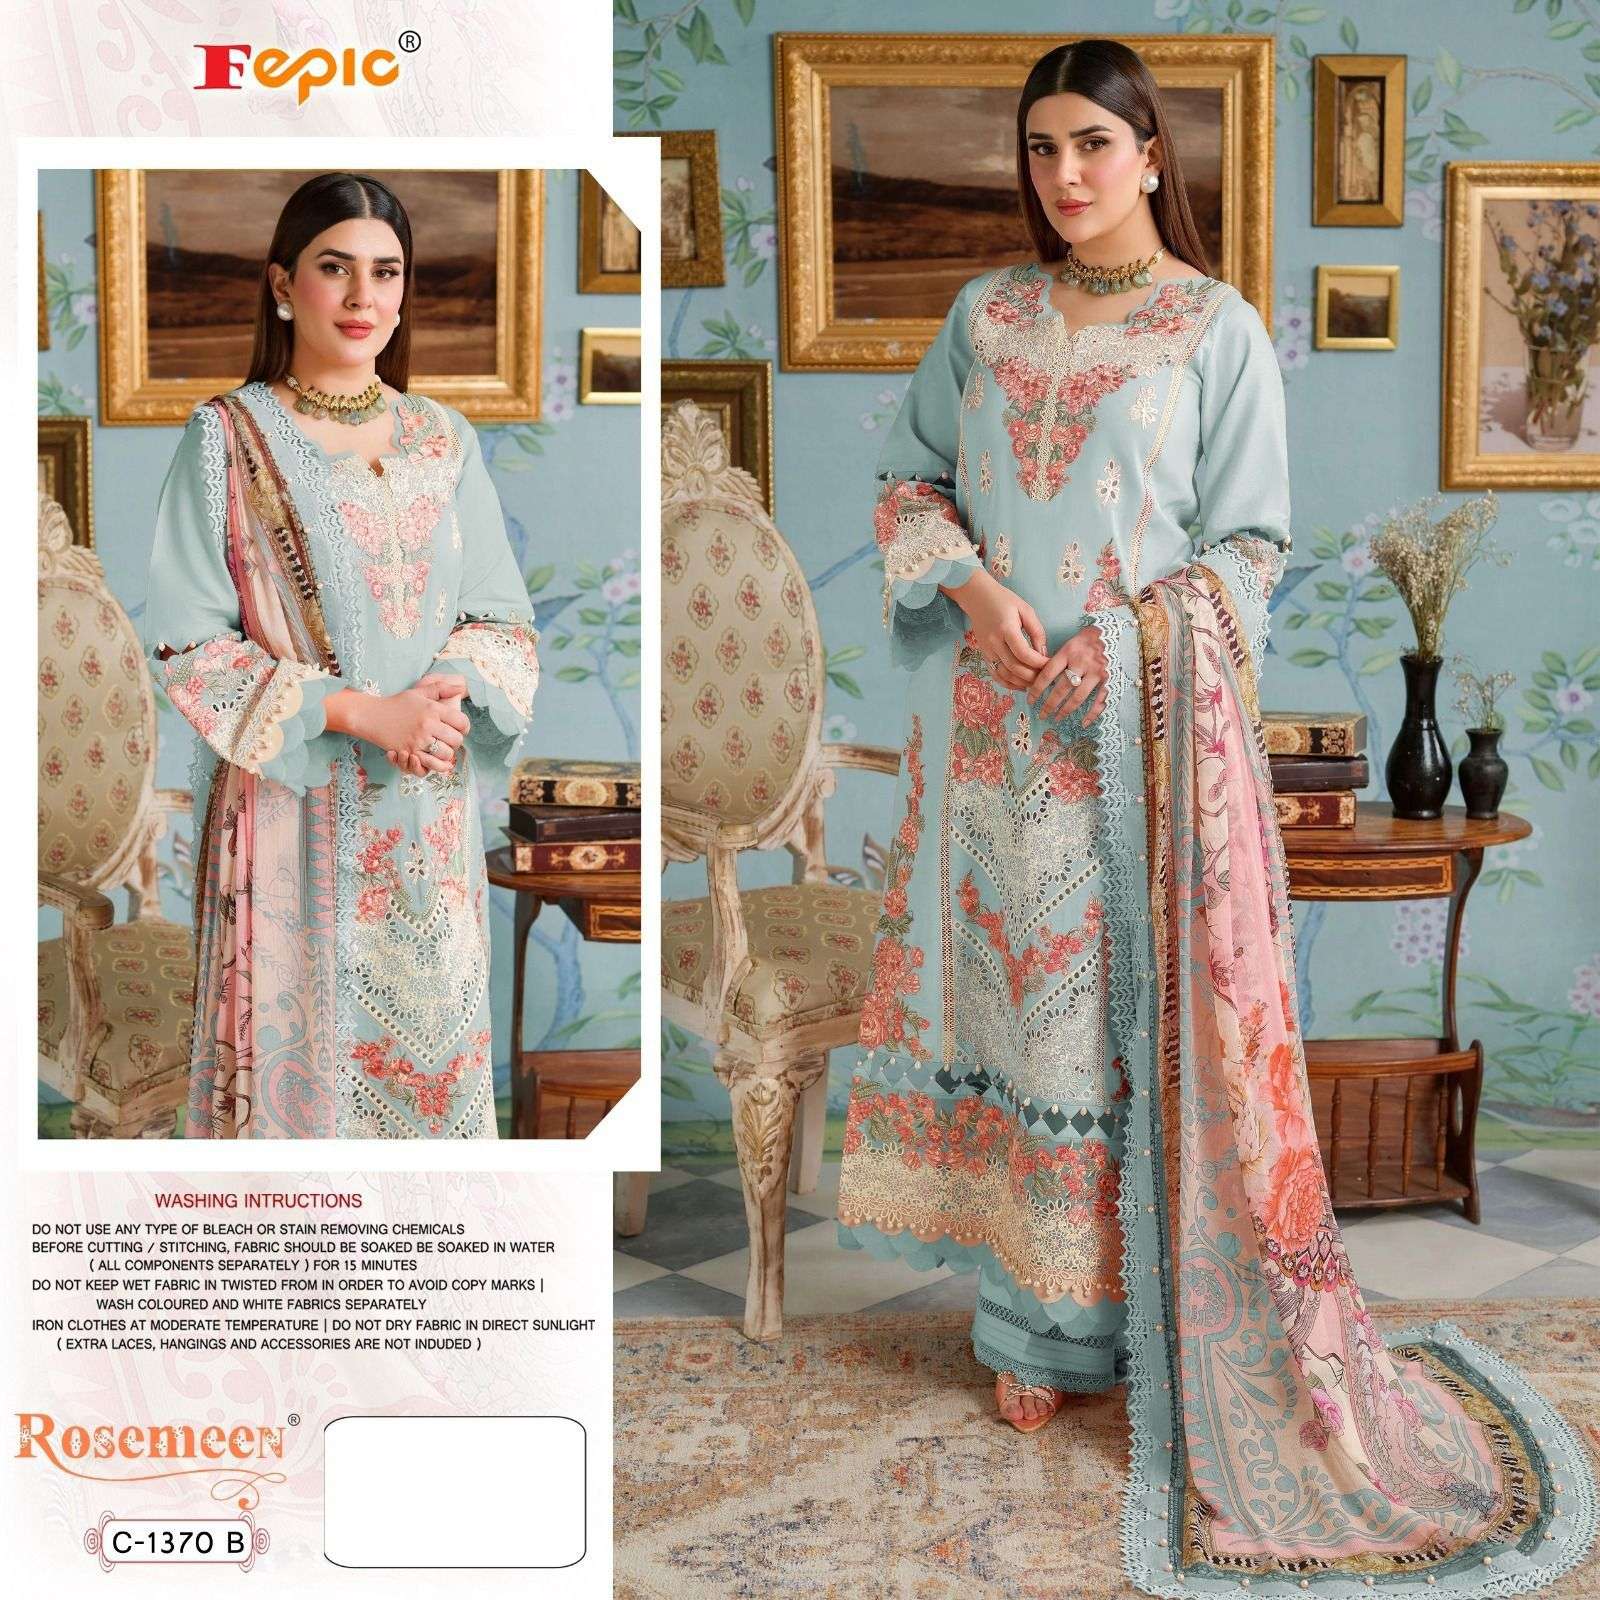 ROSEMEEN C-1370 COLOURS BY FEPIC DESIGNER COTTON EMBROIDERY DRESSES